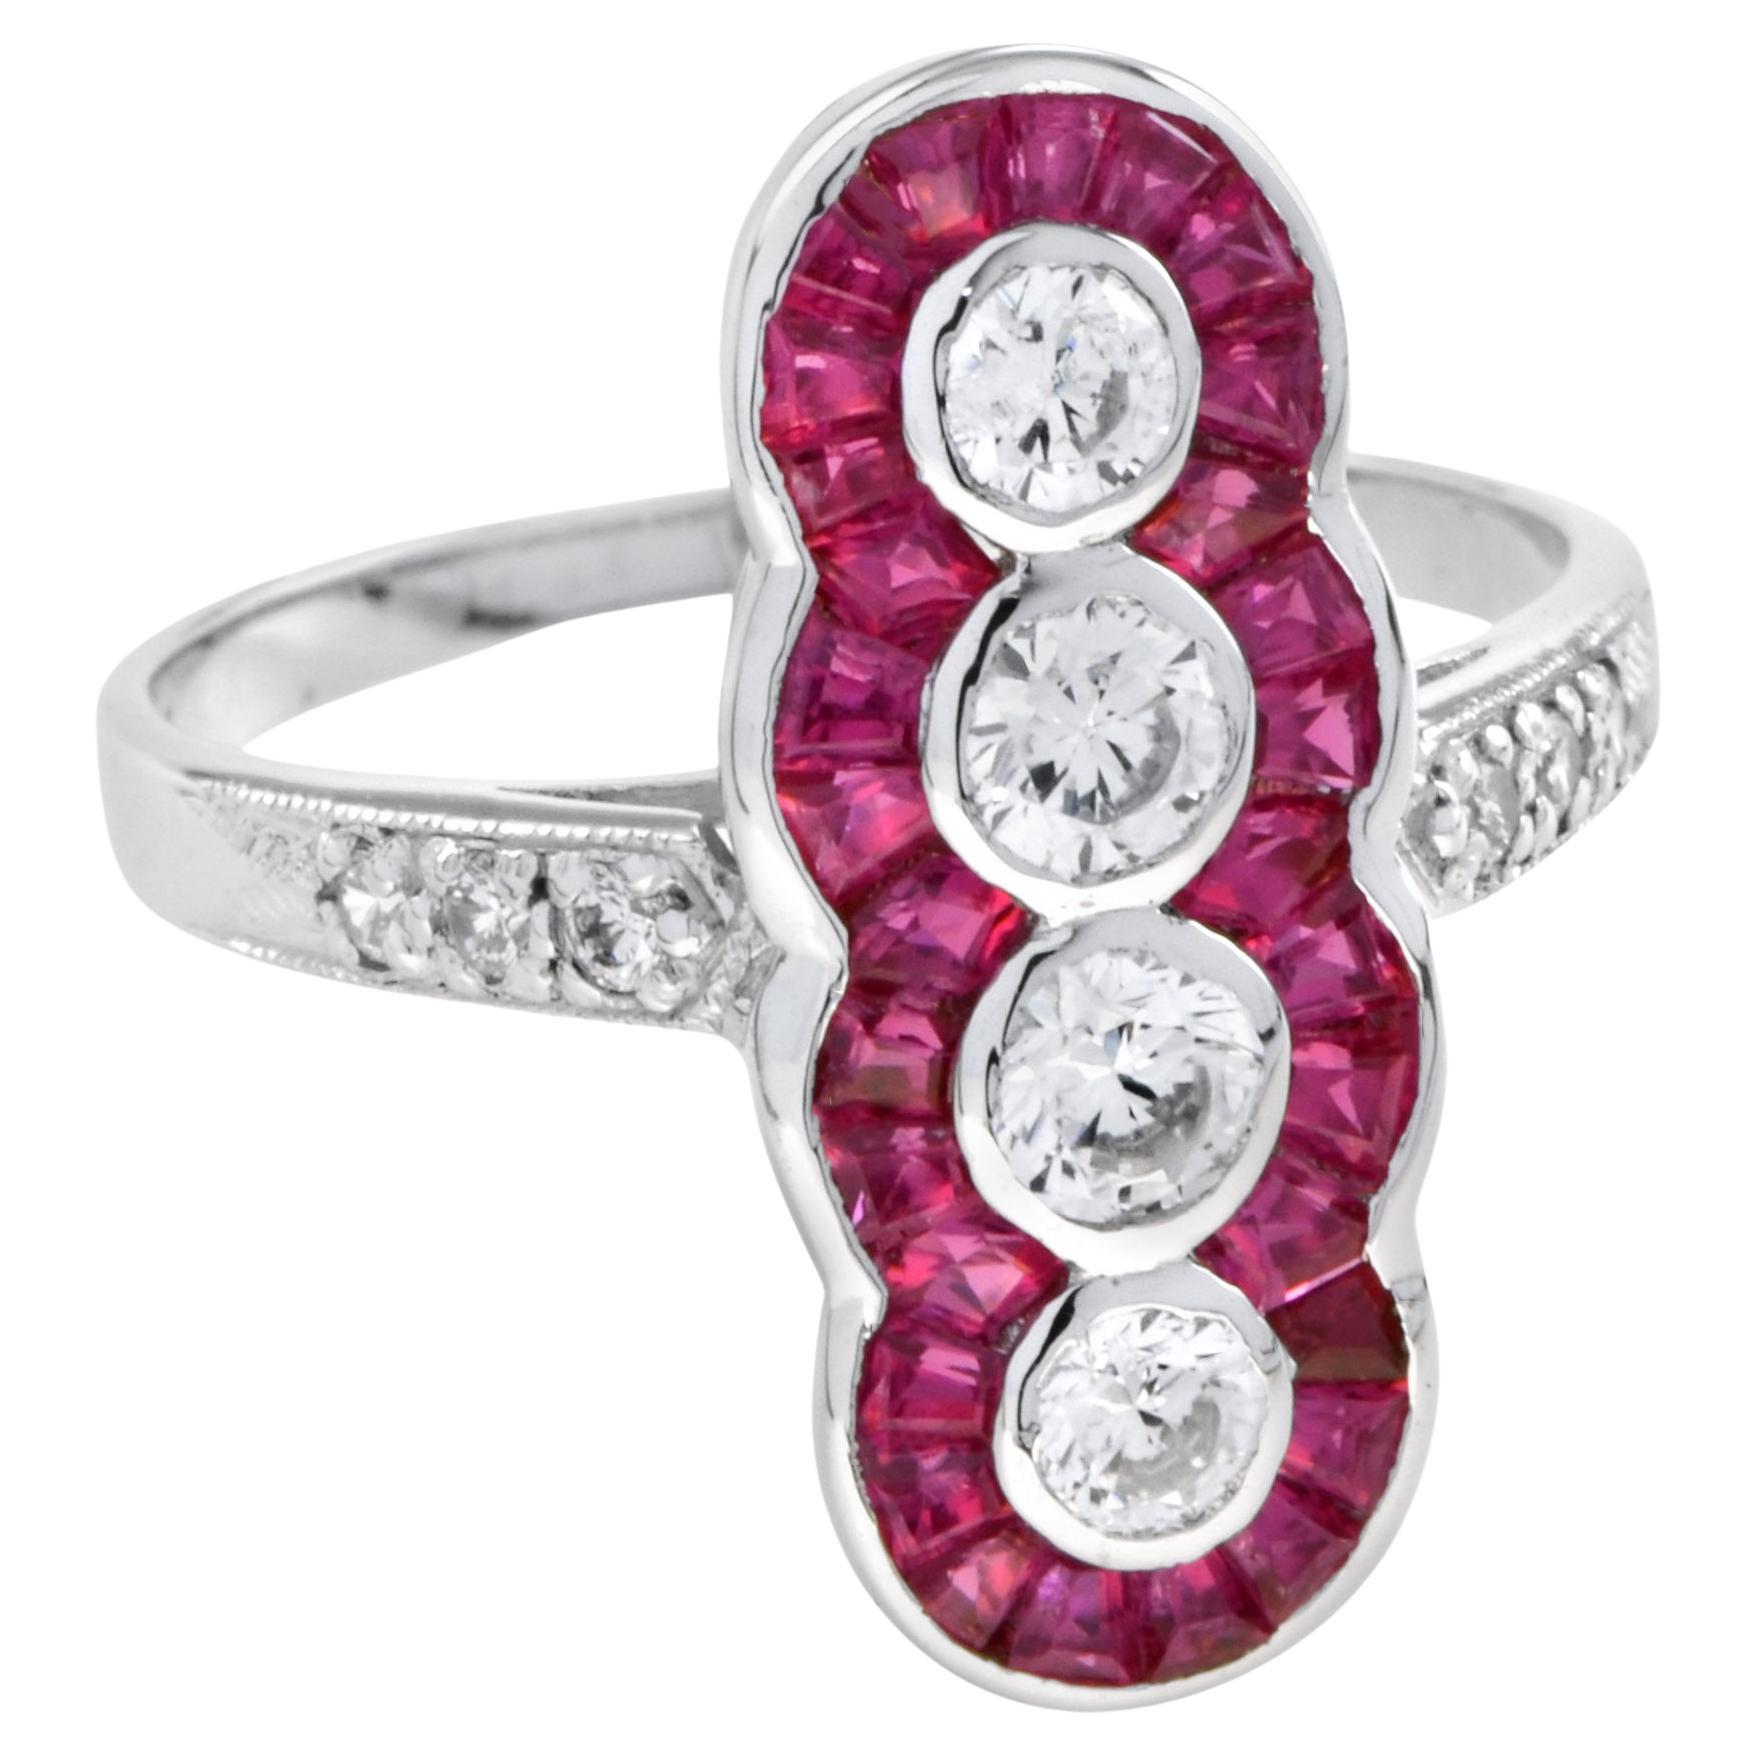 For Sale:  Four Stone Diamond and Ruby Cocktail Ring in 14K White Gold